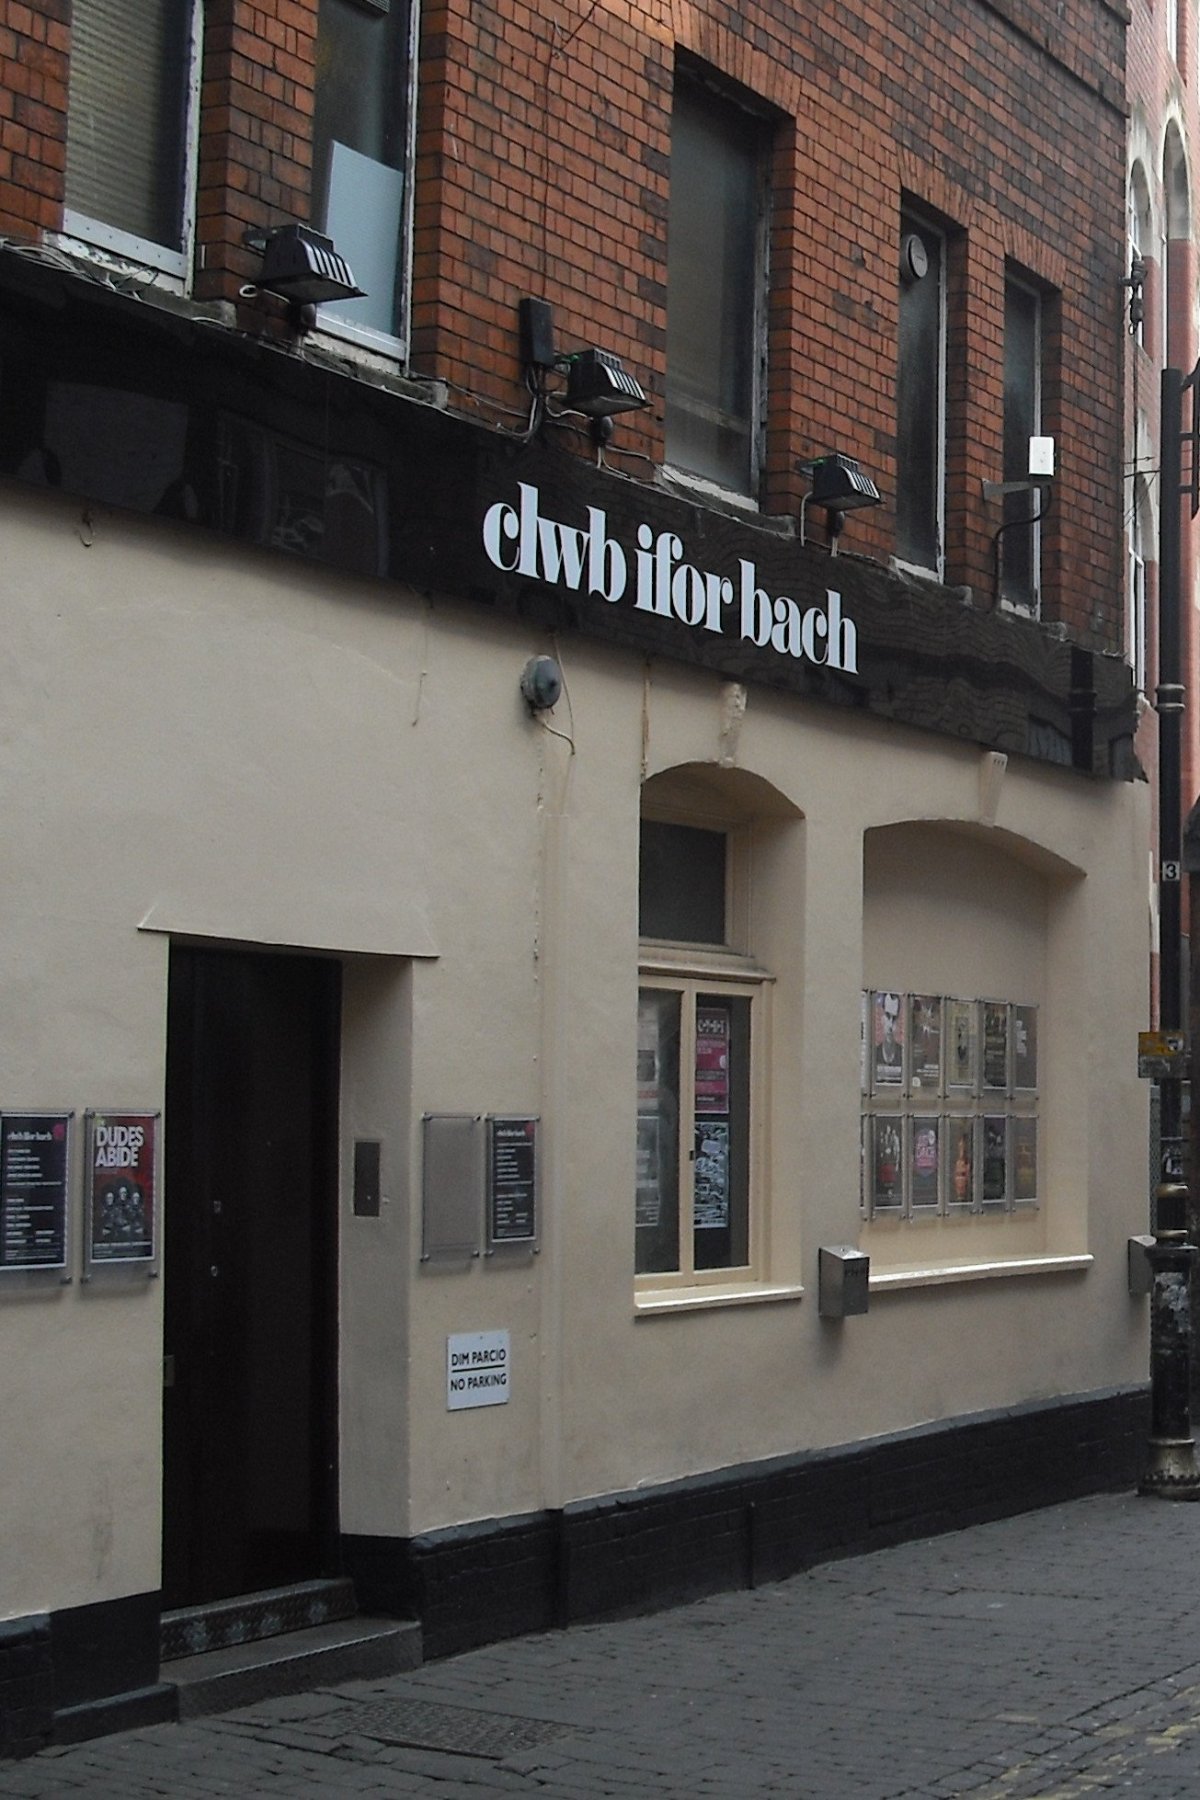 The Welsh Club / Clwb Ifor Bach